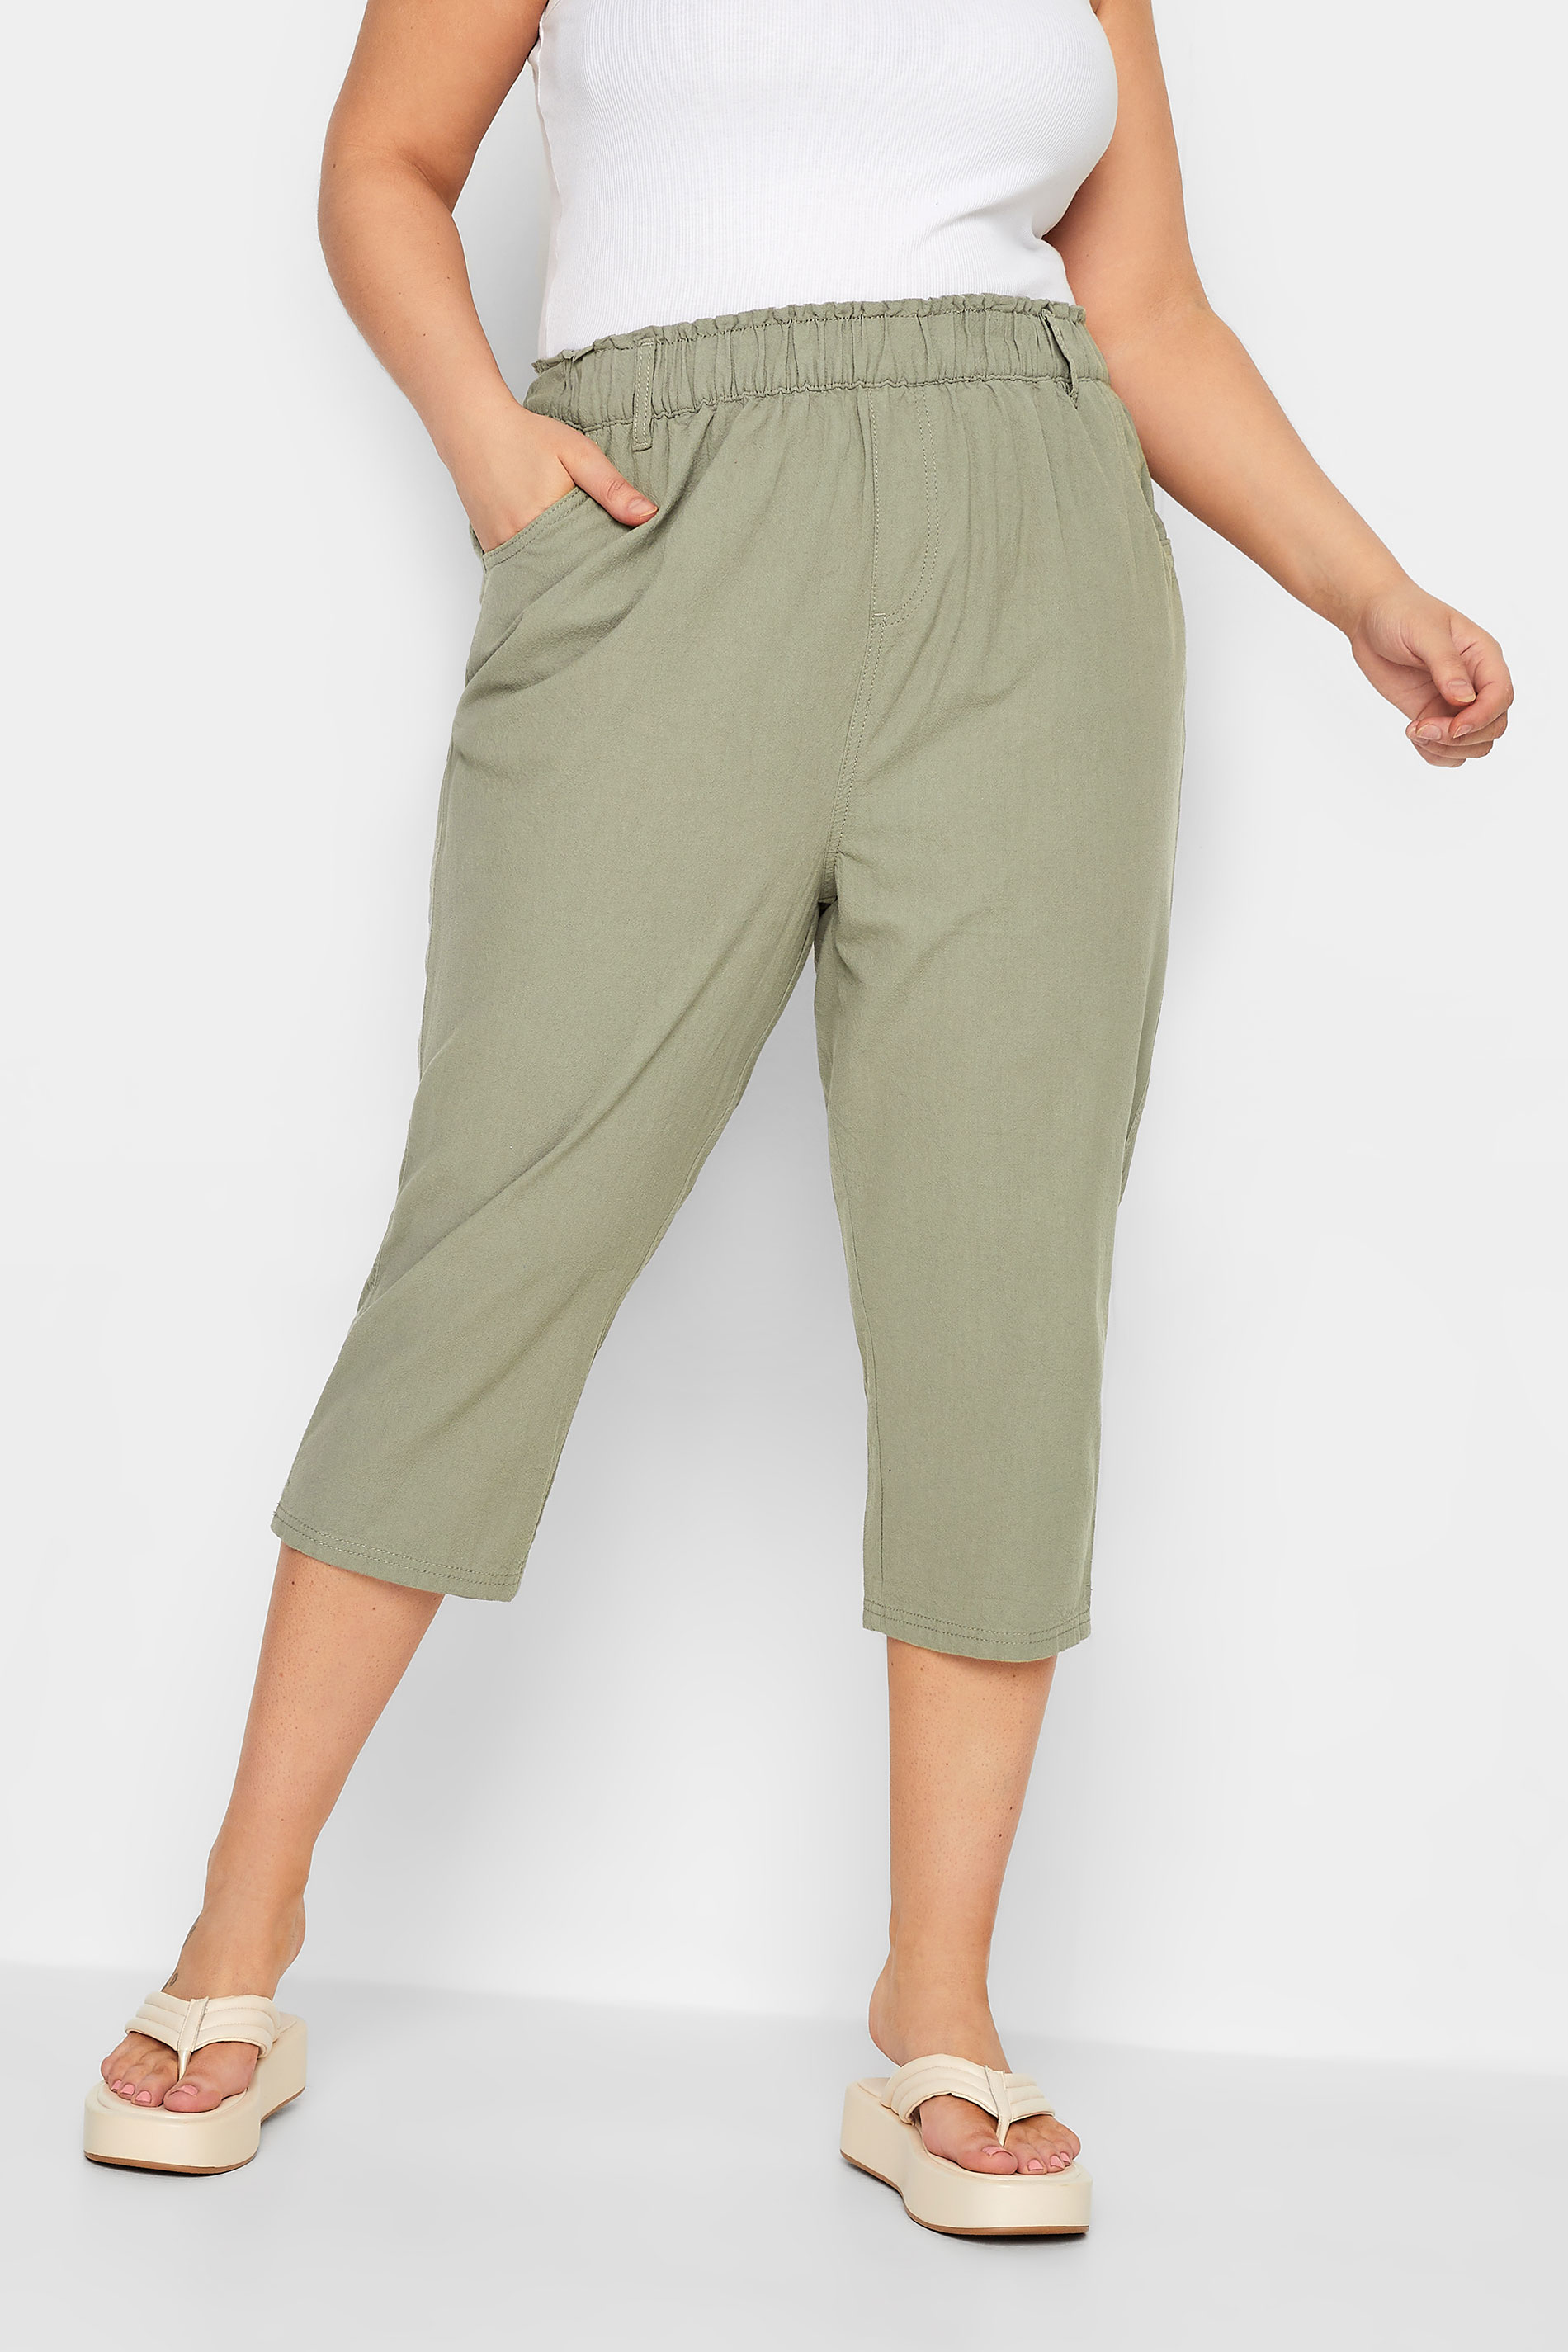 Buy Womens Linen Harem Capri Pants Plus Size Wide Leg Casual Summer Comfy  High Waisted Cotton Capris Loose Cropped Trousers with Pockets Online at  desertcartINDIA